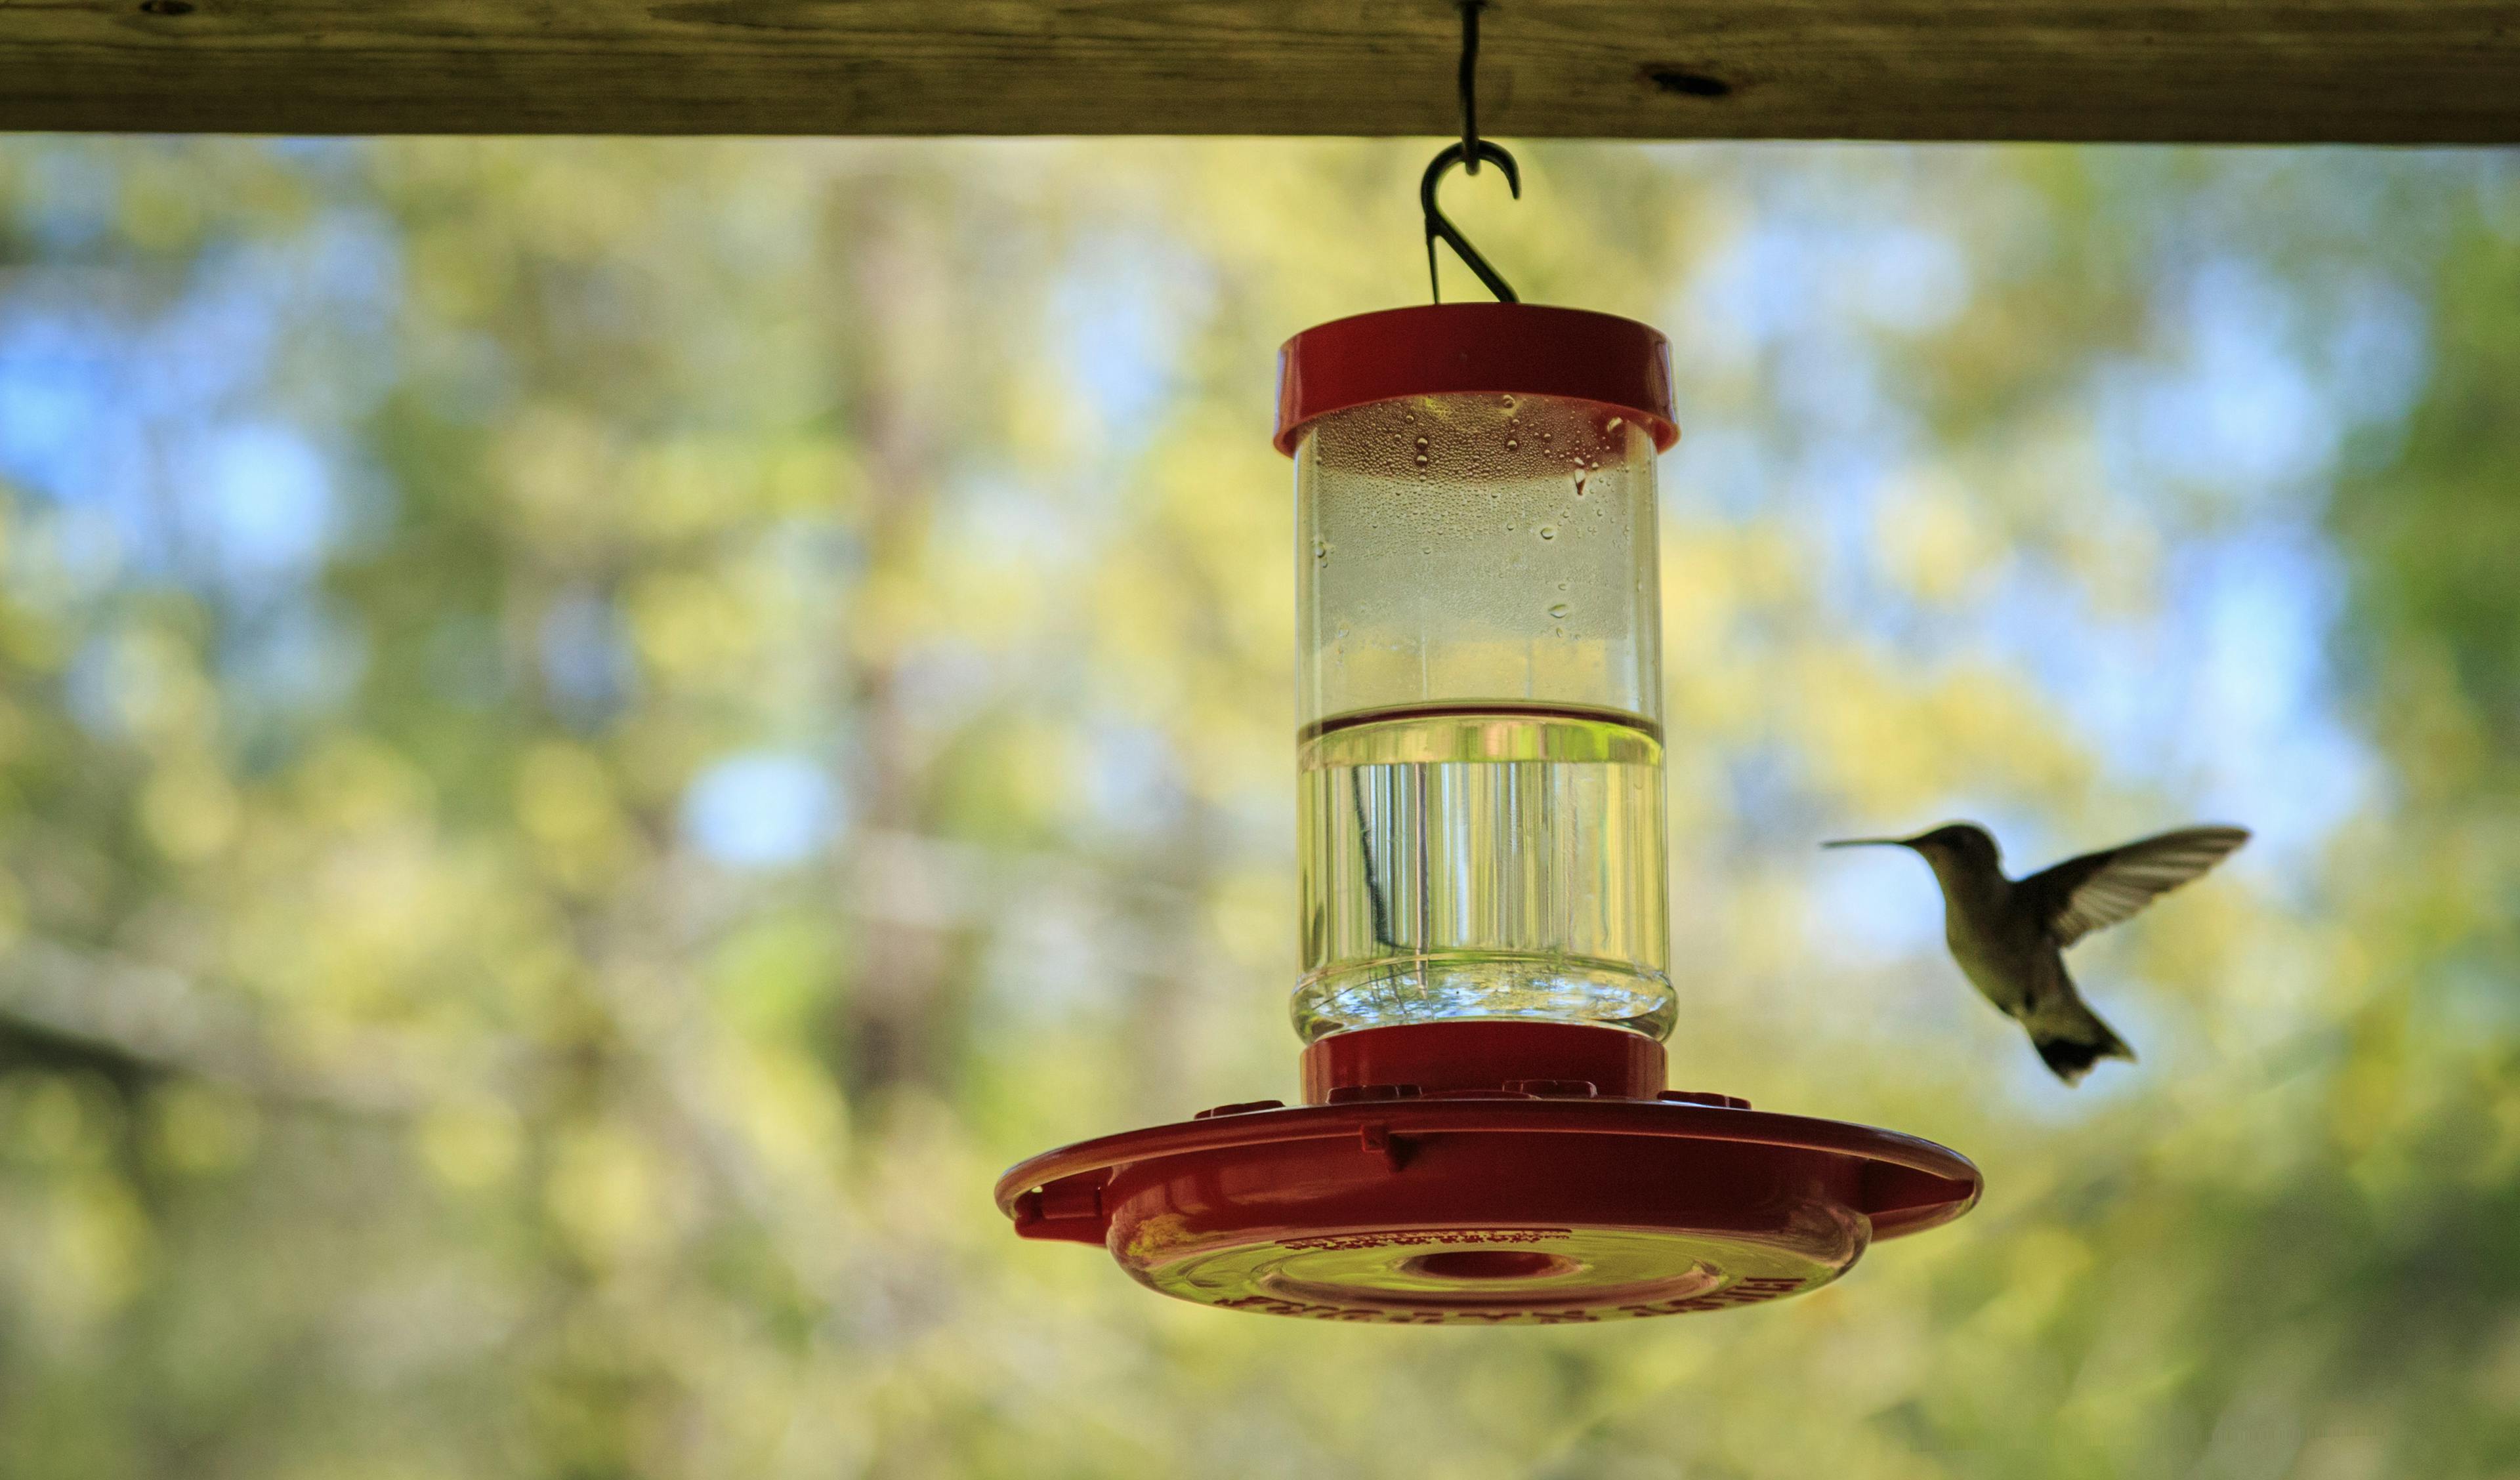 A hummingbird flying next to a red hummingbird feeder with clear liquid in the feeder